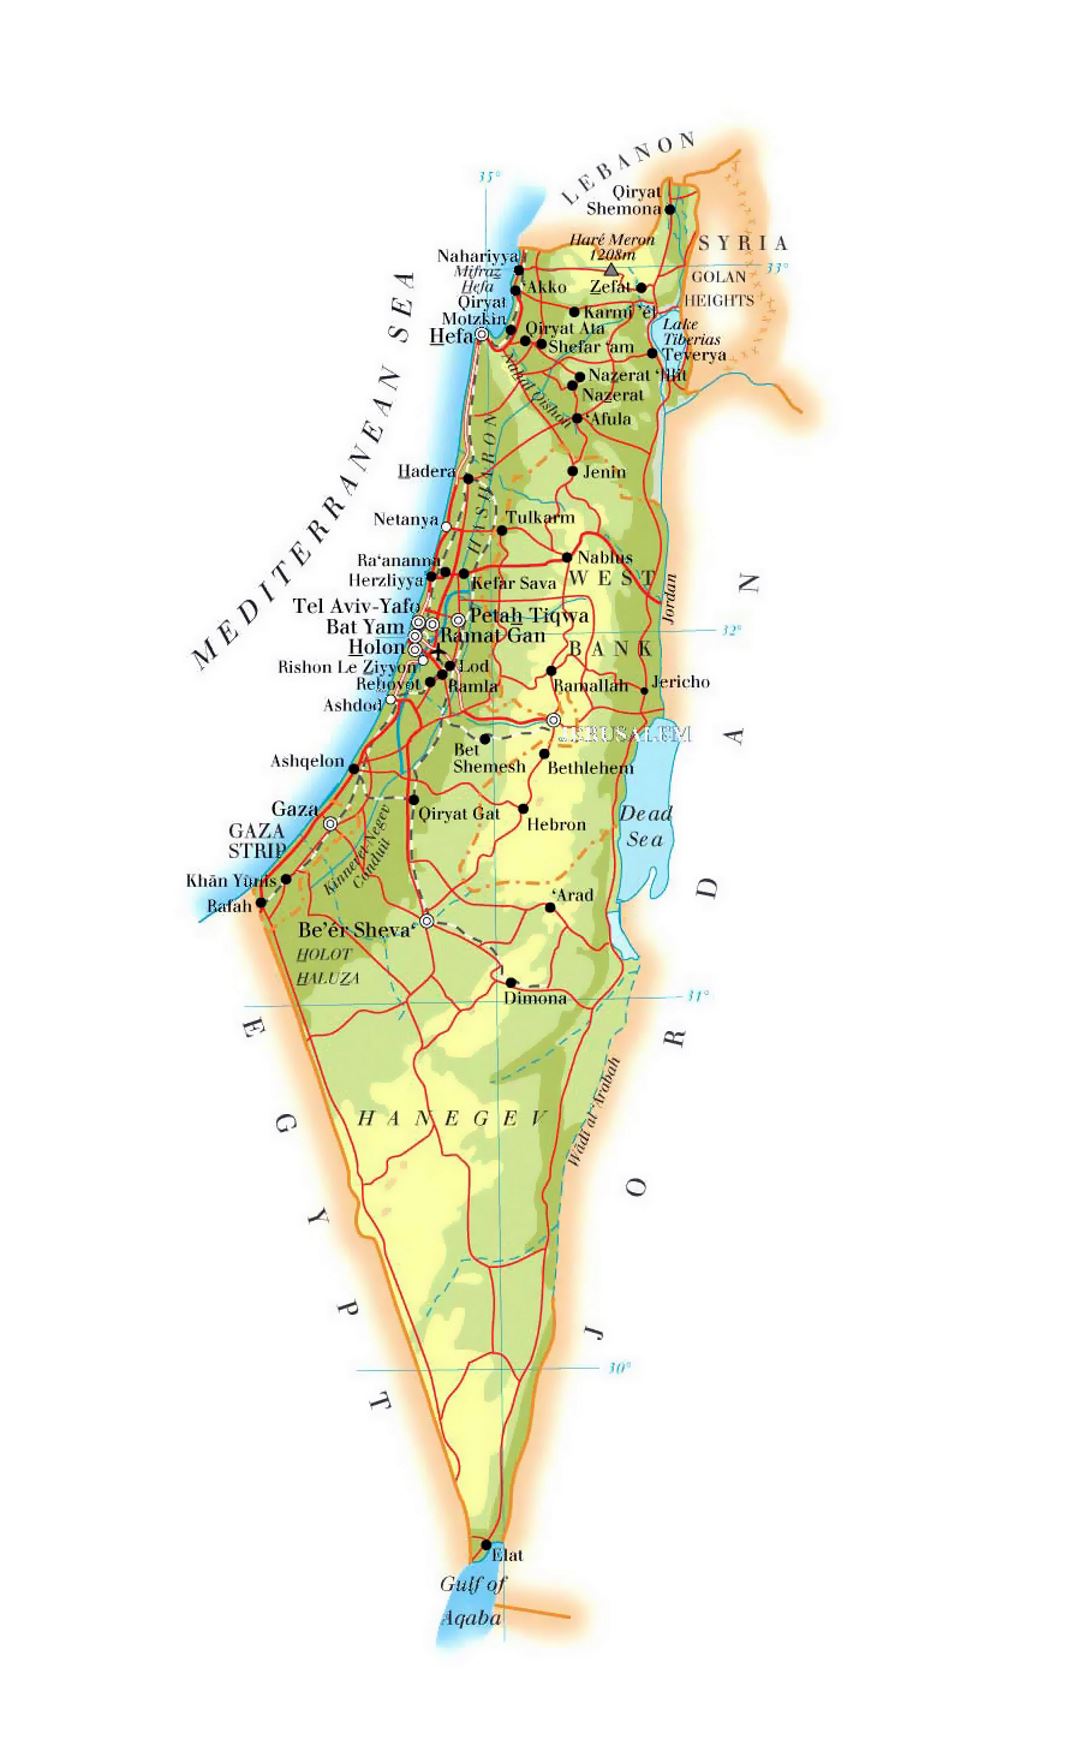 Detailed elevation map of Israel with roads, cities and airports